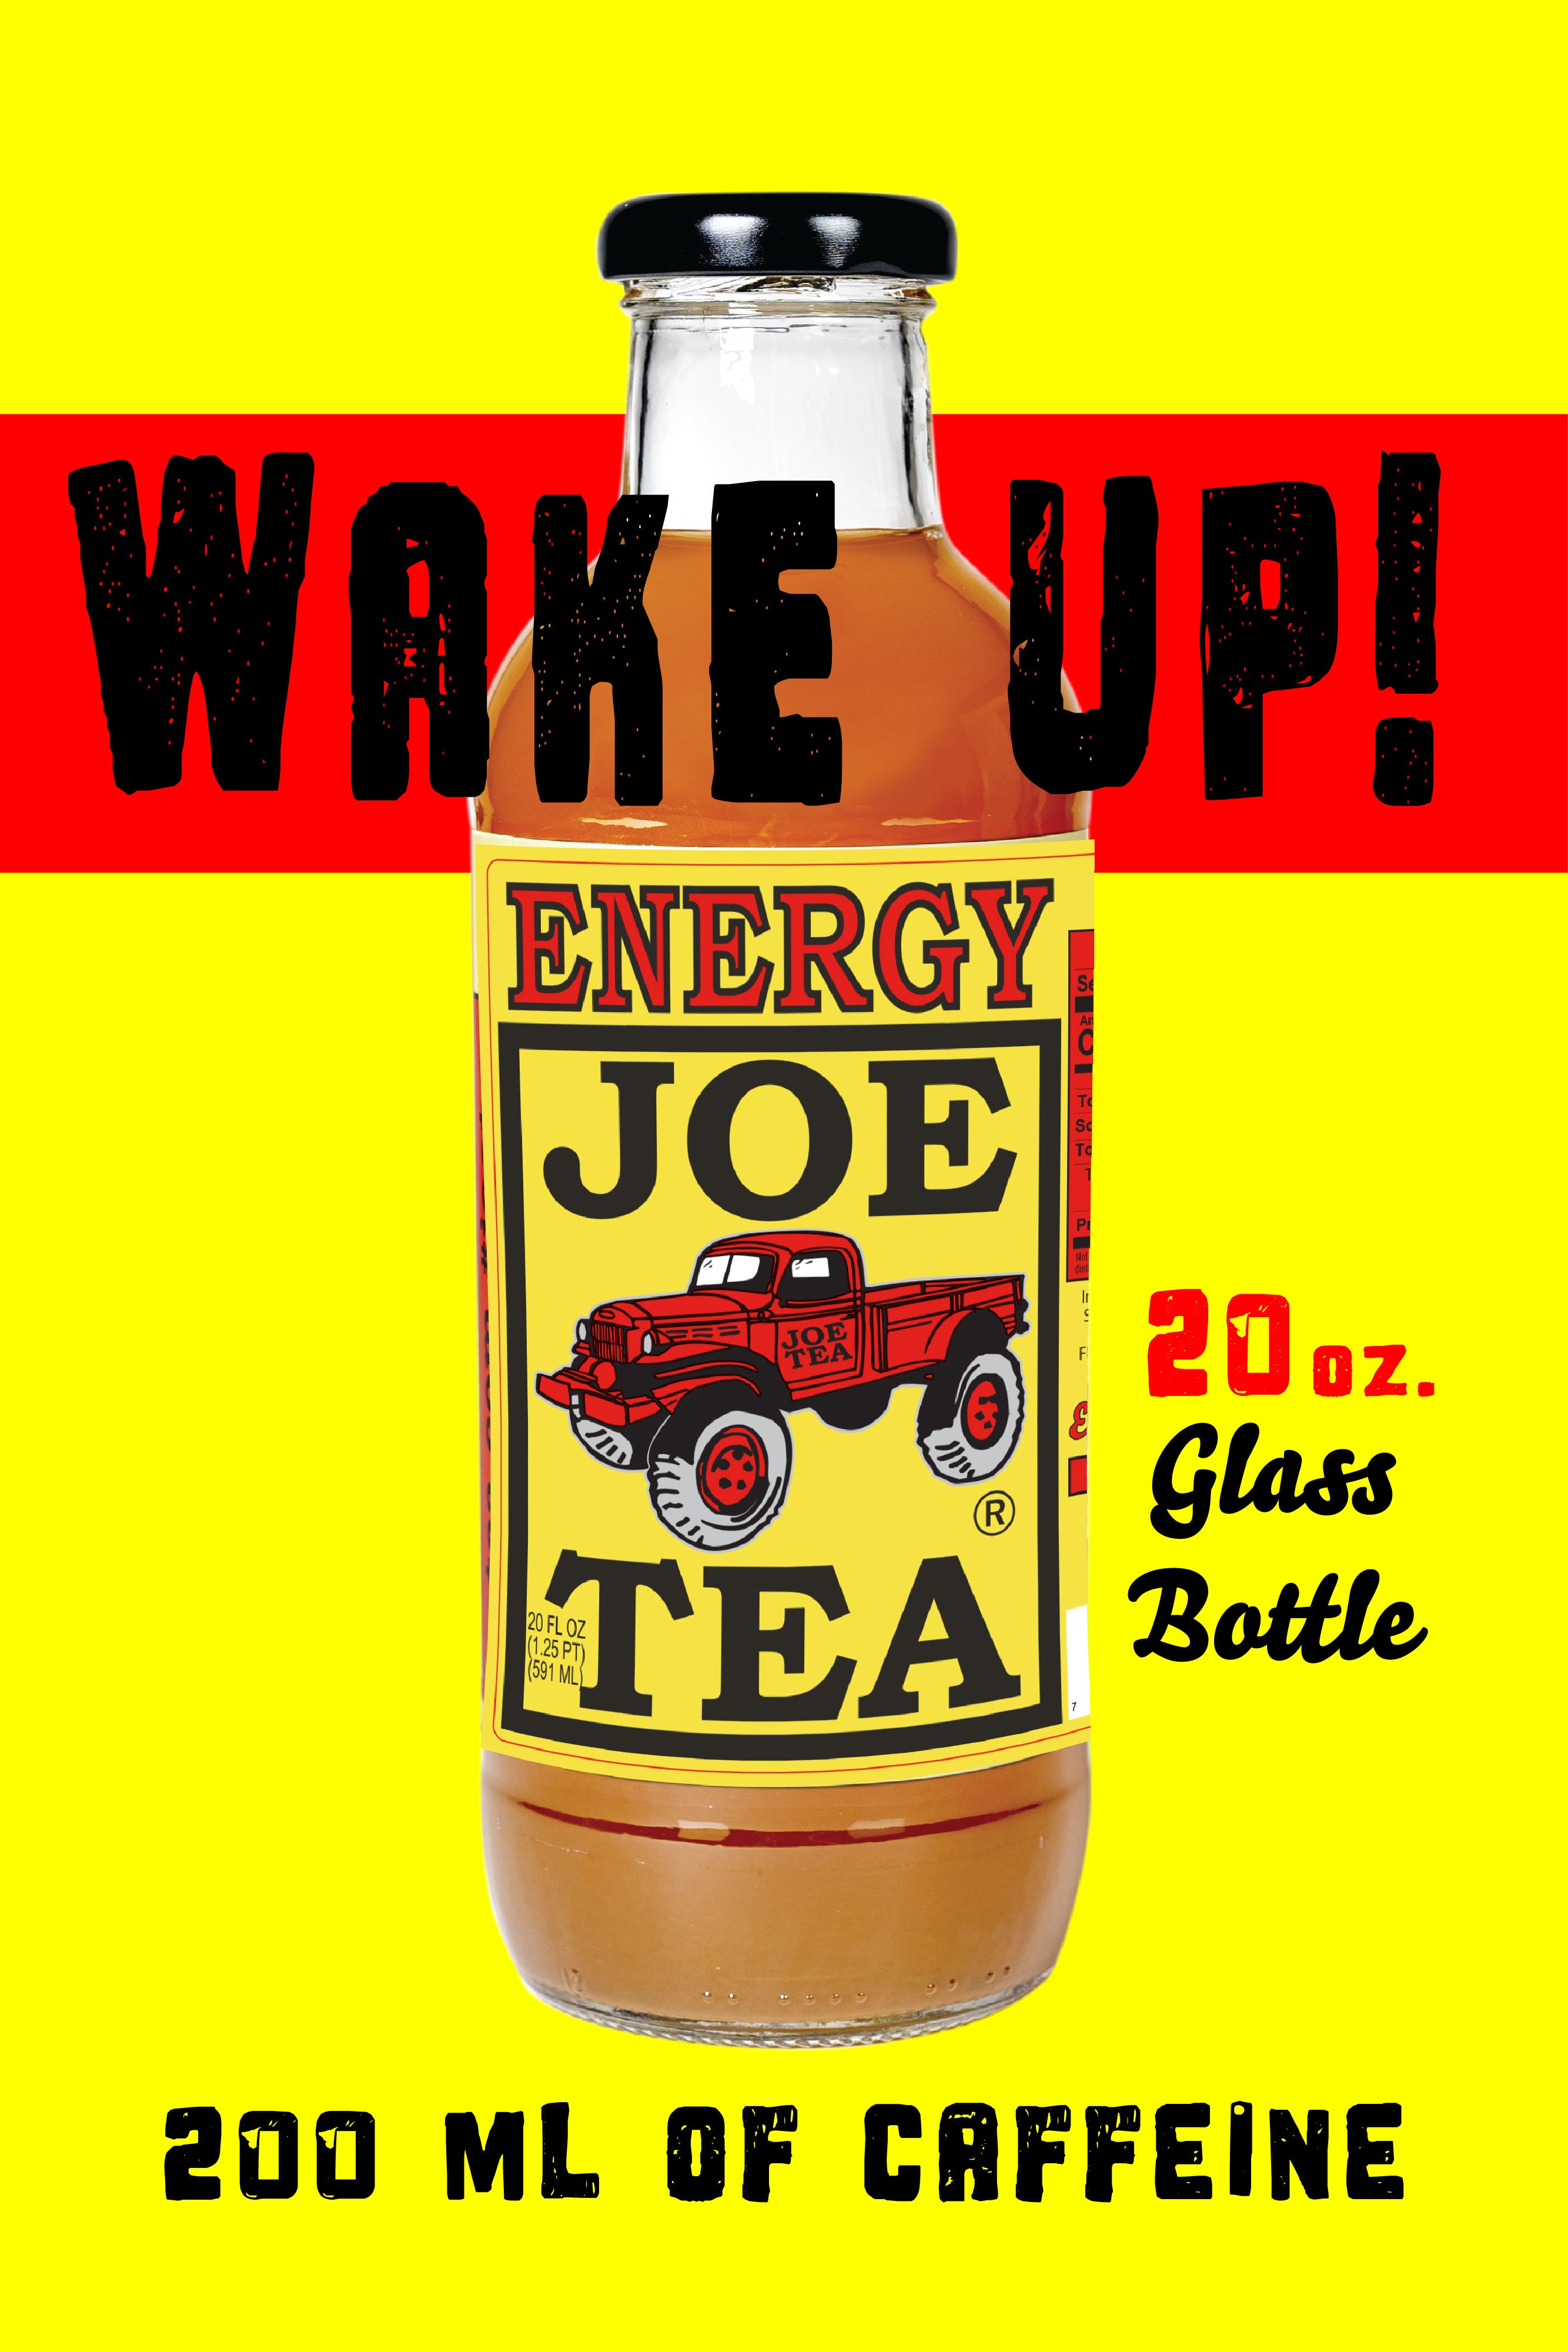 "Wake up" to 200 ml of caffeine when you drink  a Joe Tea Energy in a 20 oz. glass bottle 